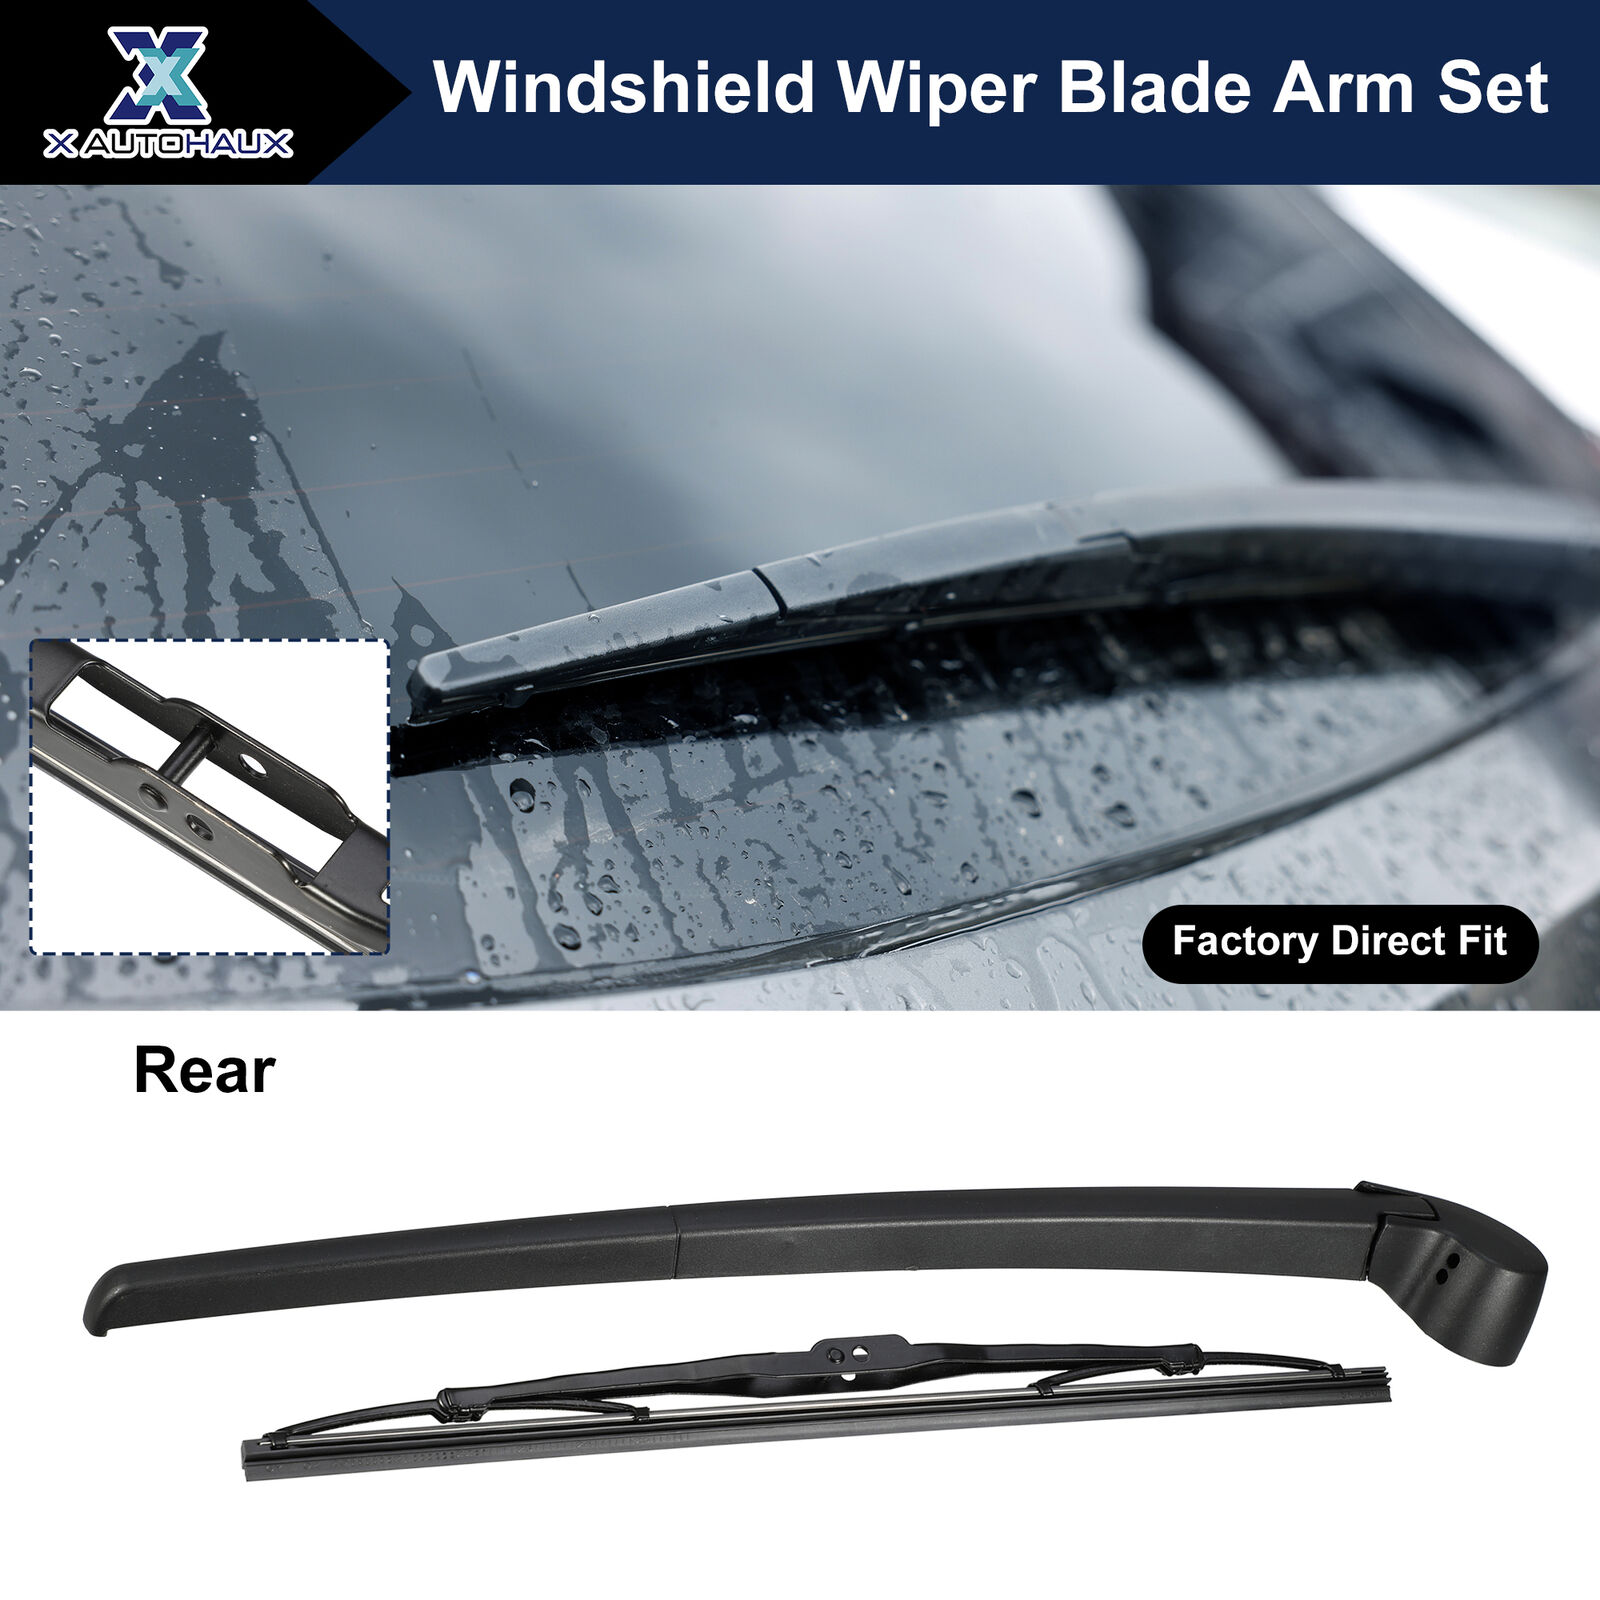 Rear Windshield Wiper Blade Arm Set for Audi A4 Avant for Audi RS4 Avant